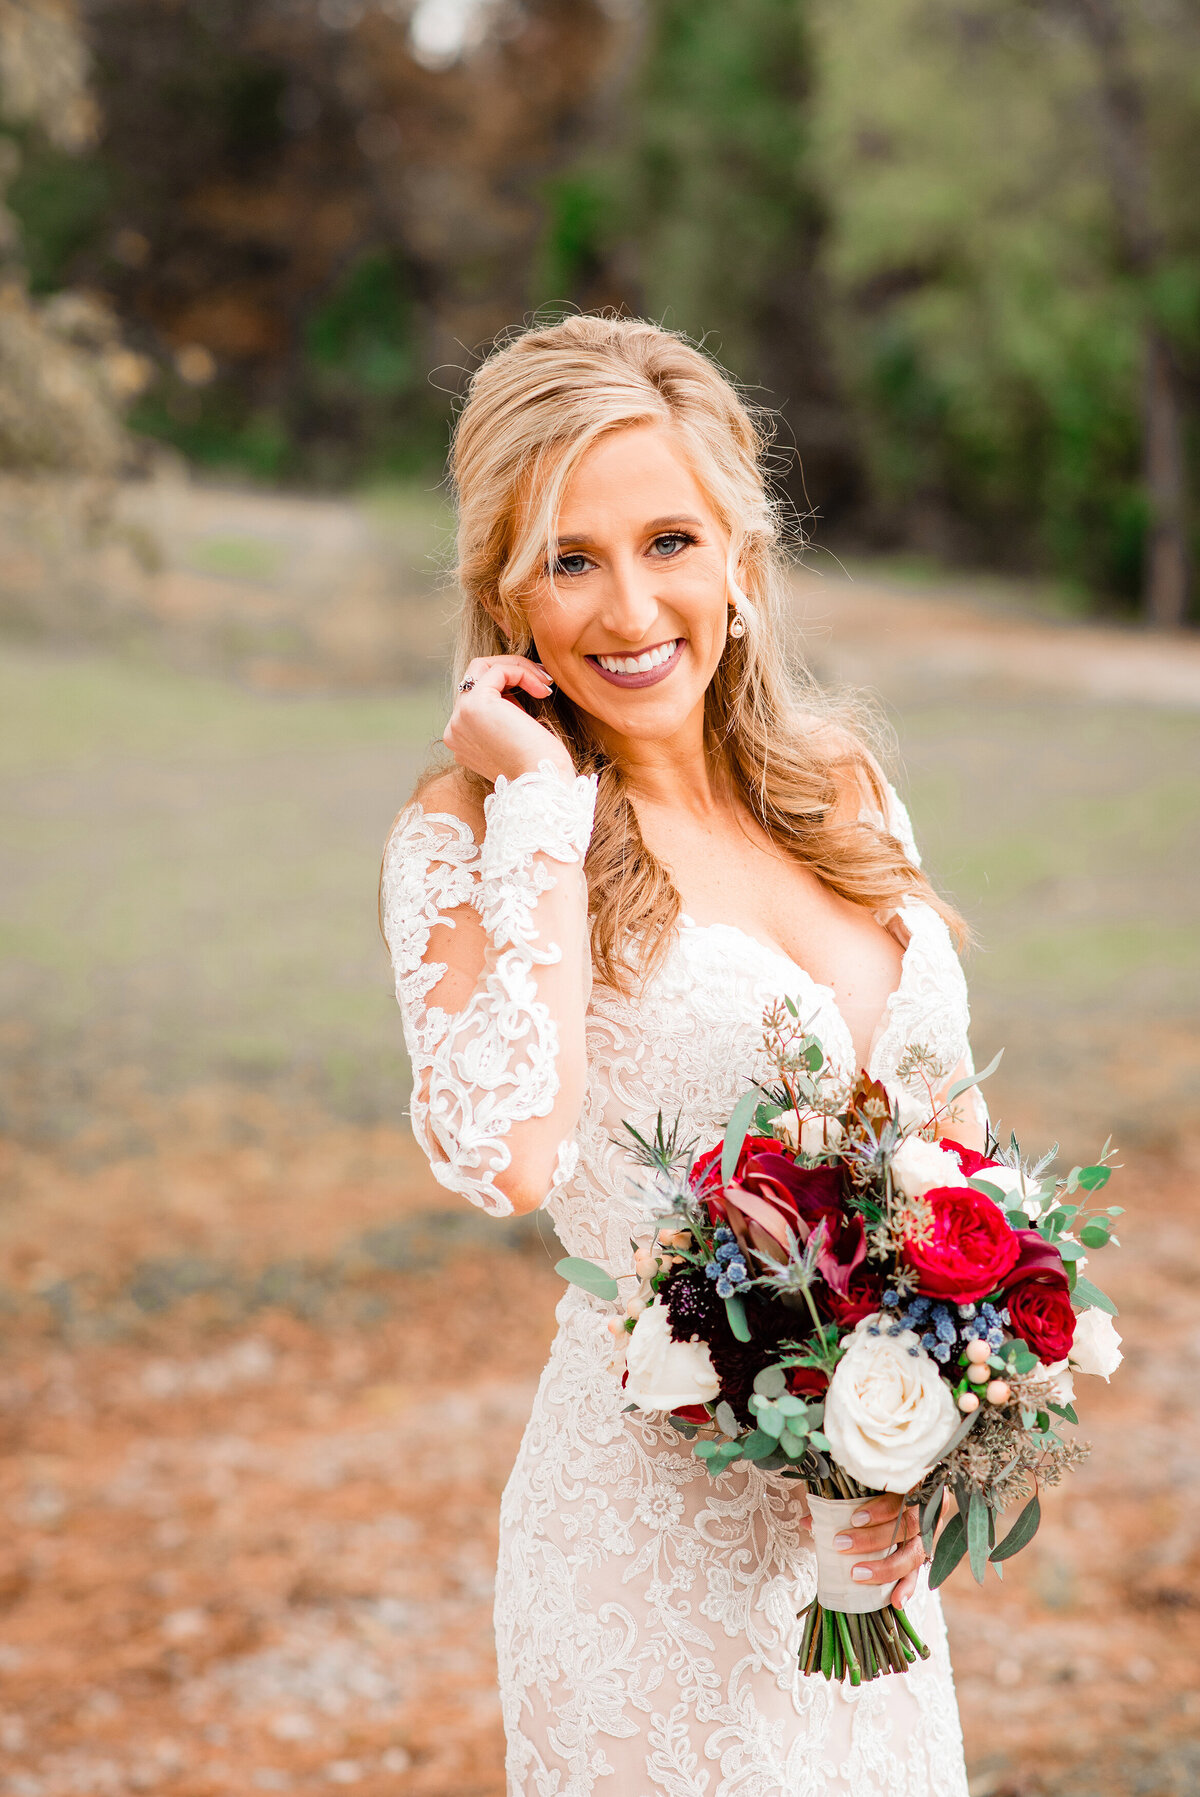 Bride adjusting hair, wearing a long sleeve lace dress and holding a cream and red bouquet